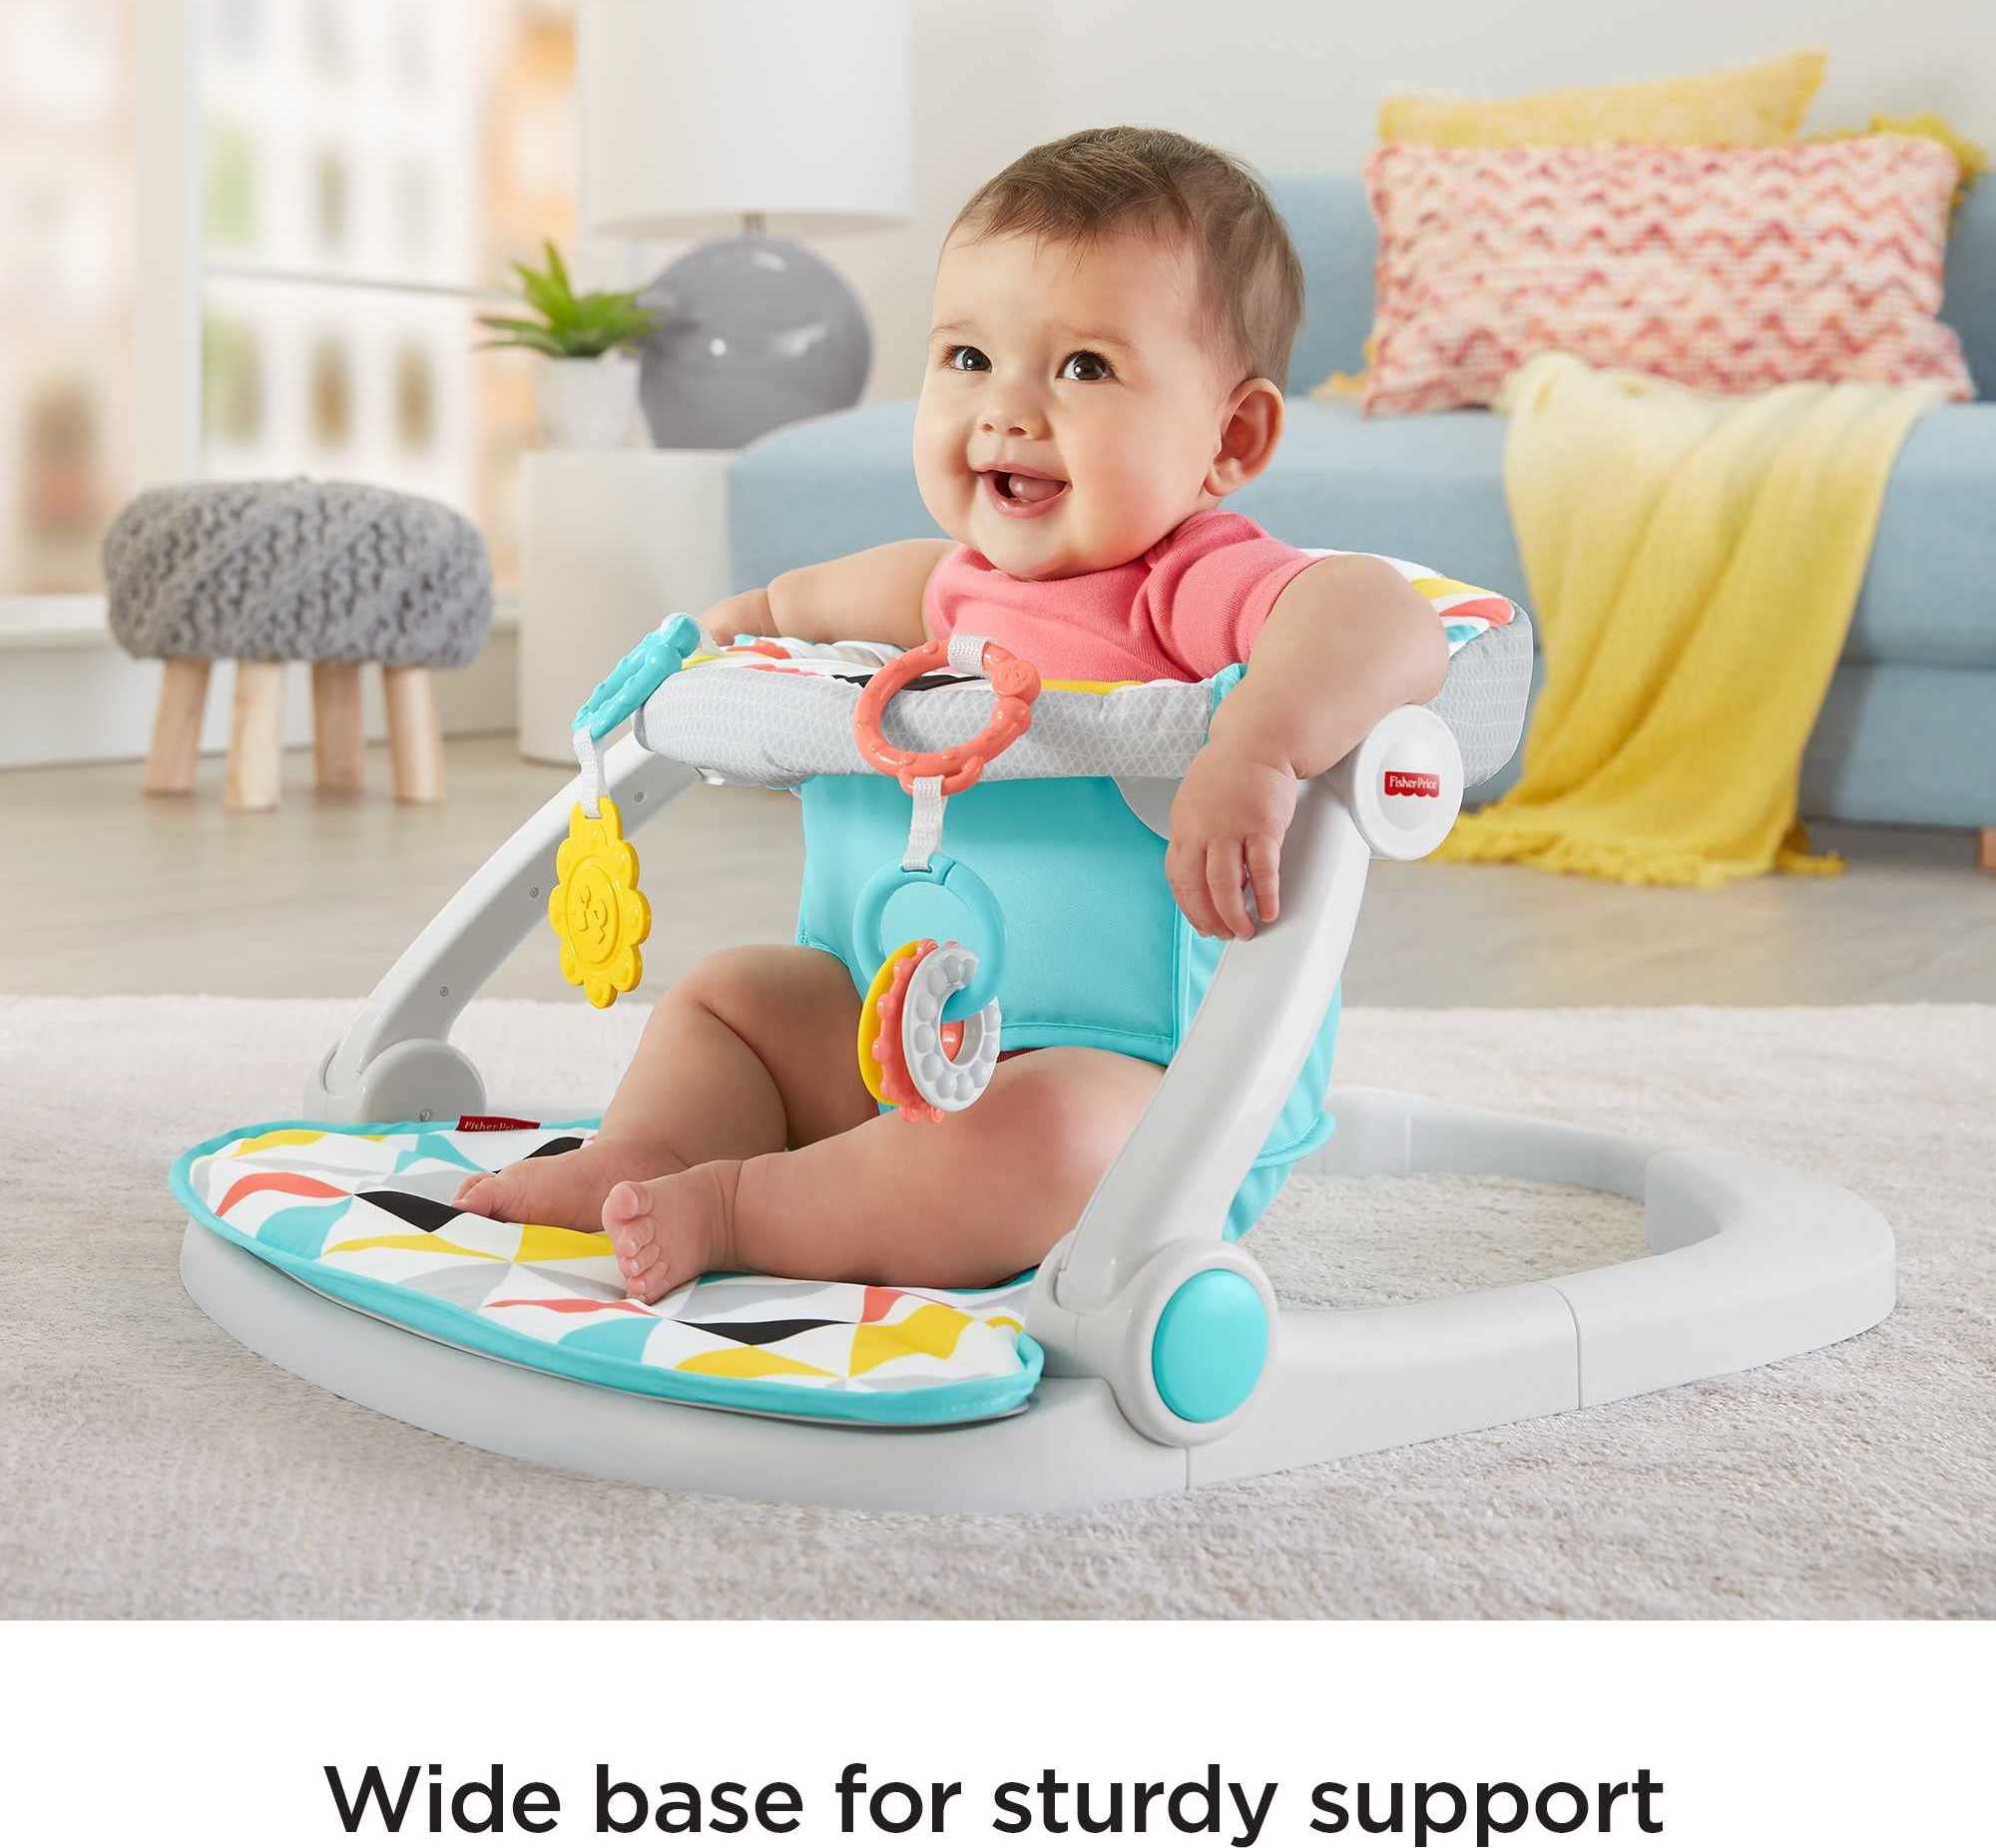 Fisher-Price Portable Baby Chair Sit-Me-Up Floor Seat with Developmental Toys & Machine Washable Seat Pad, Windmill